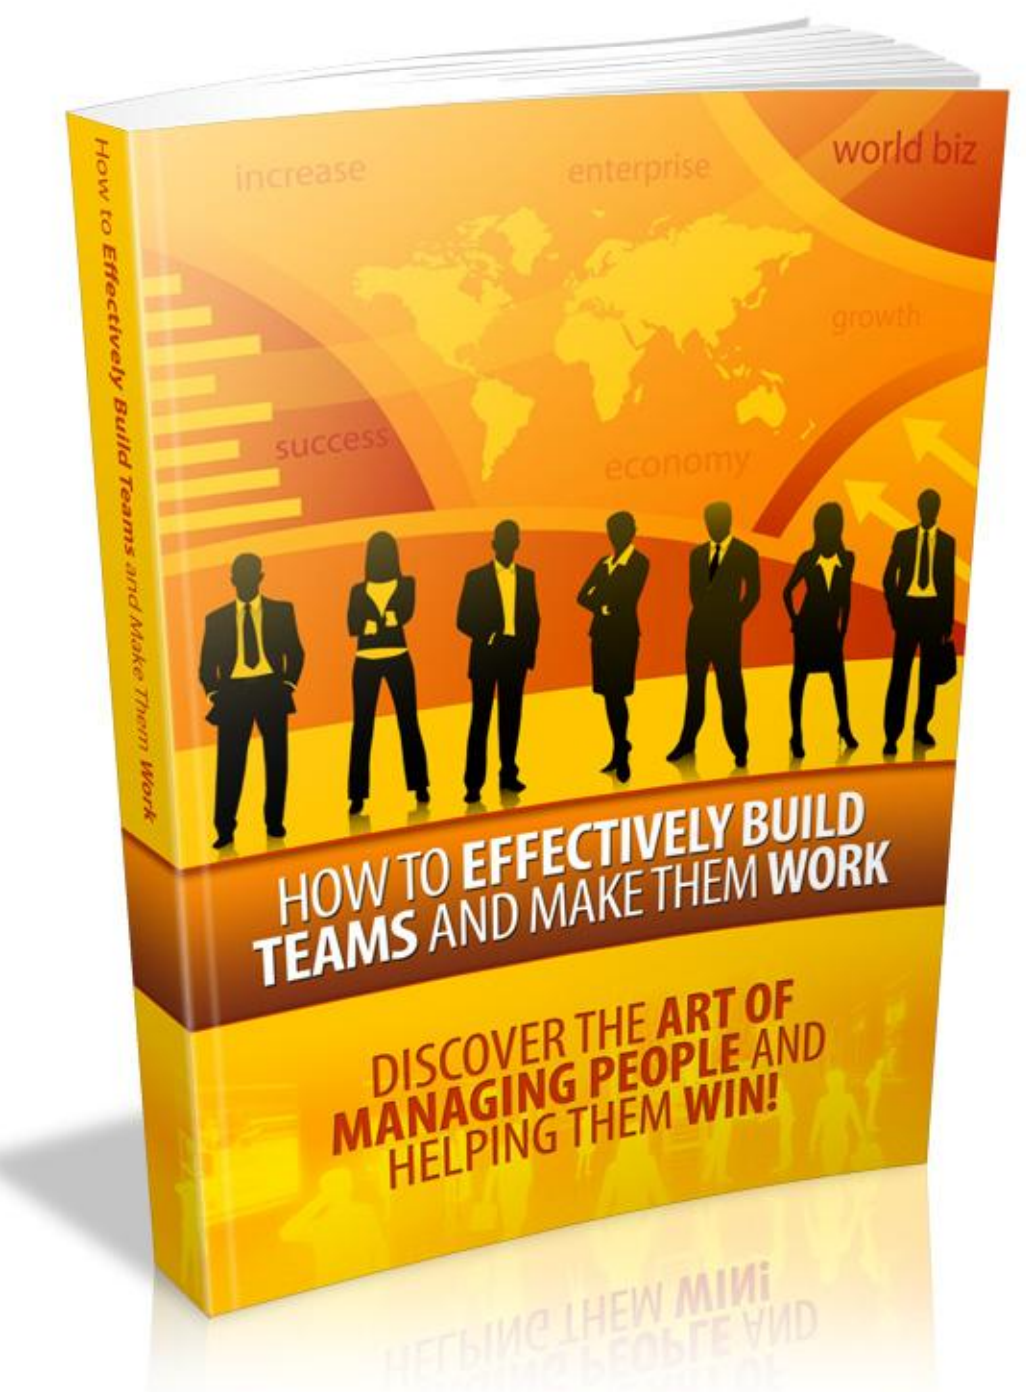 How To Effectively Build Teams and Make Them Work